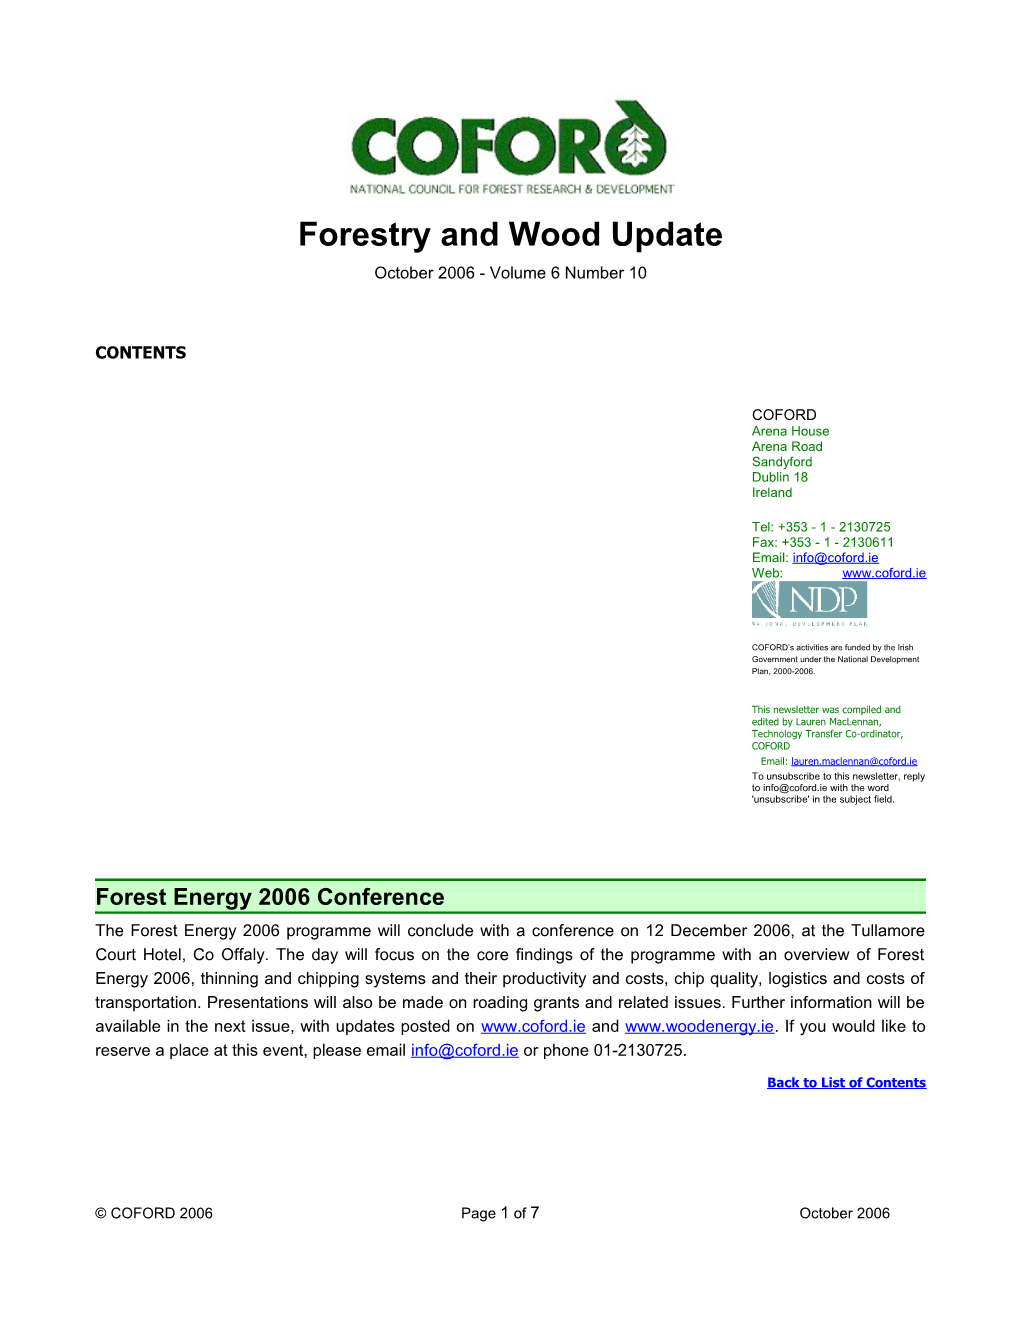 Forest Energy 2006 Conference